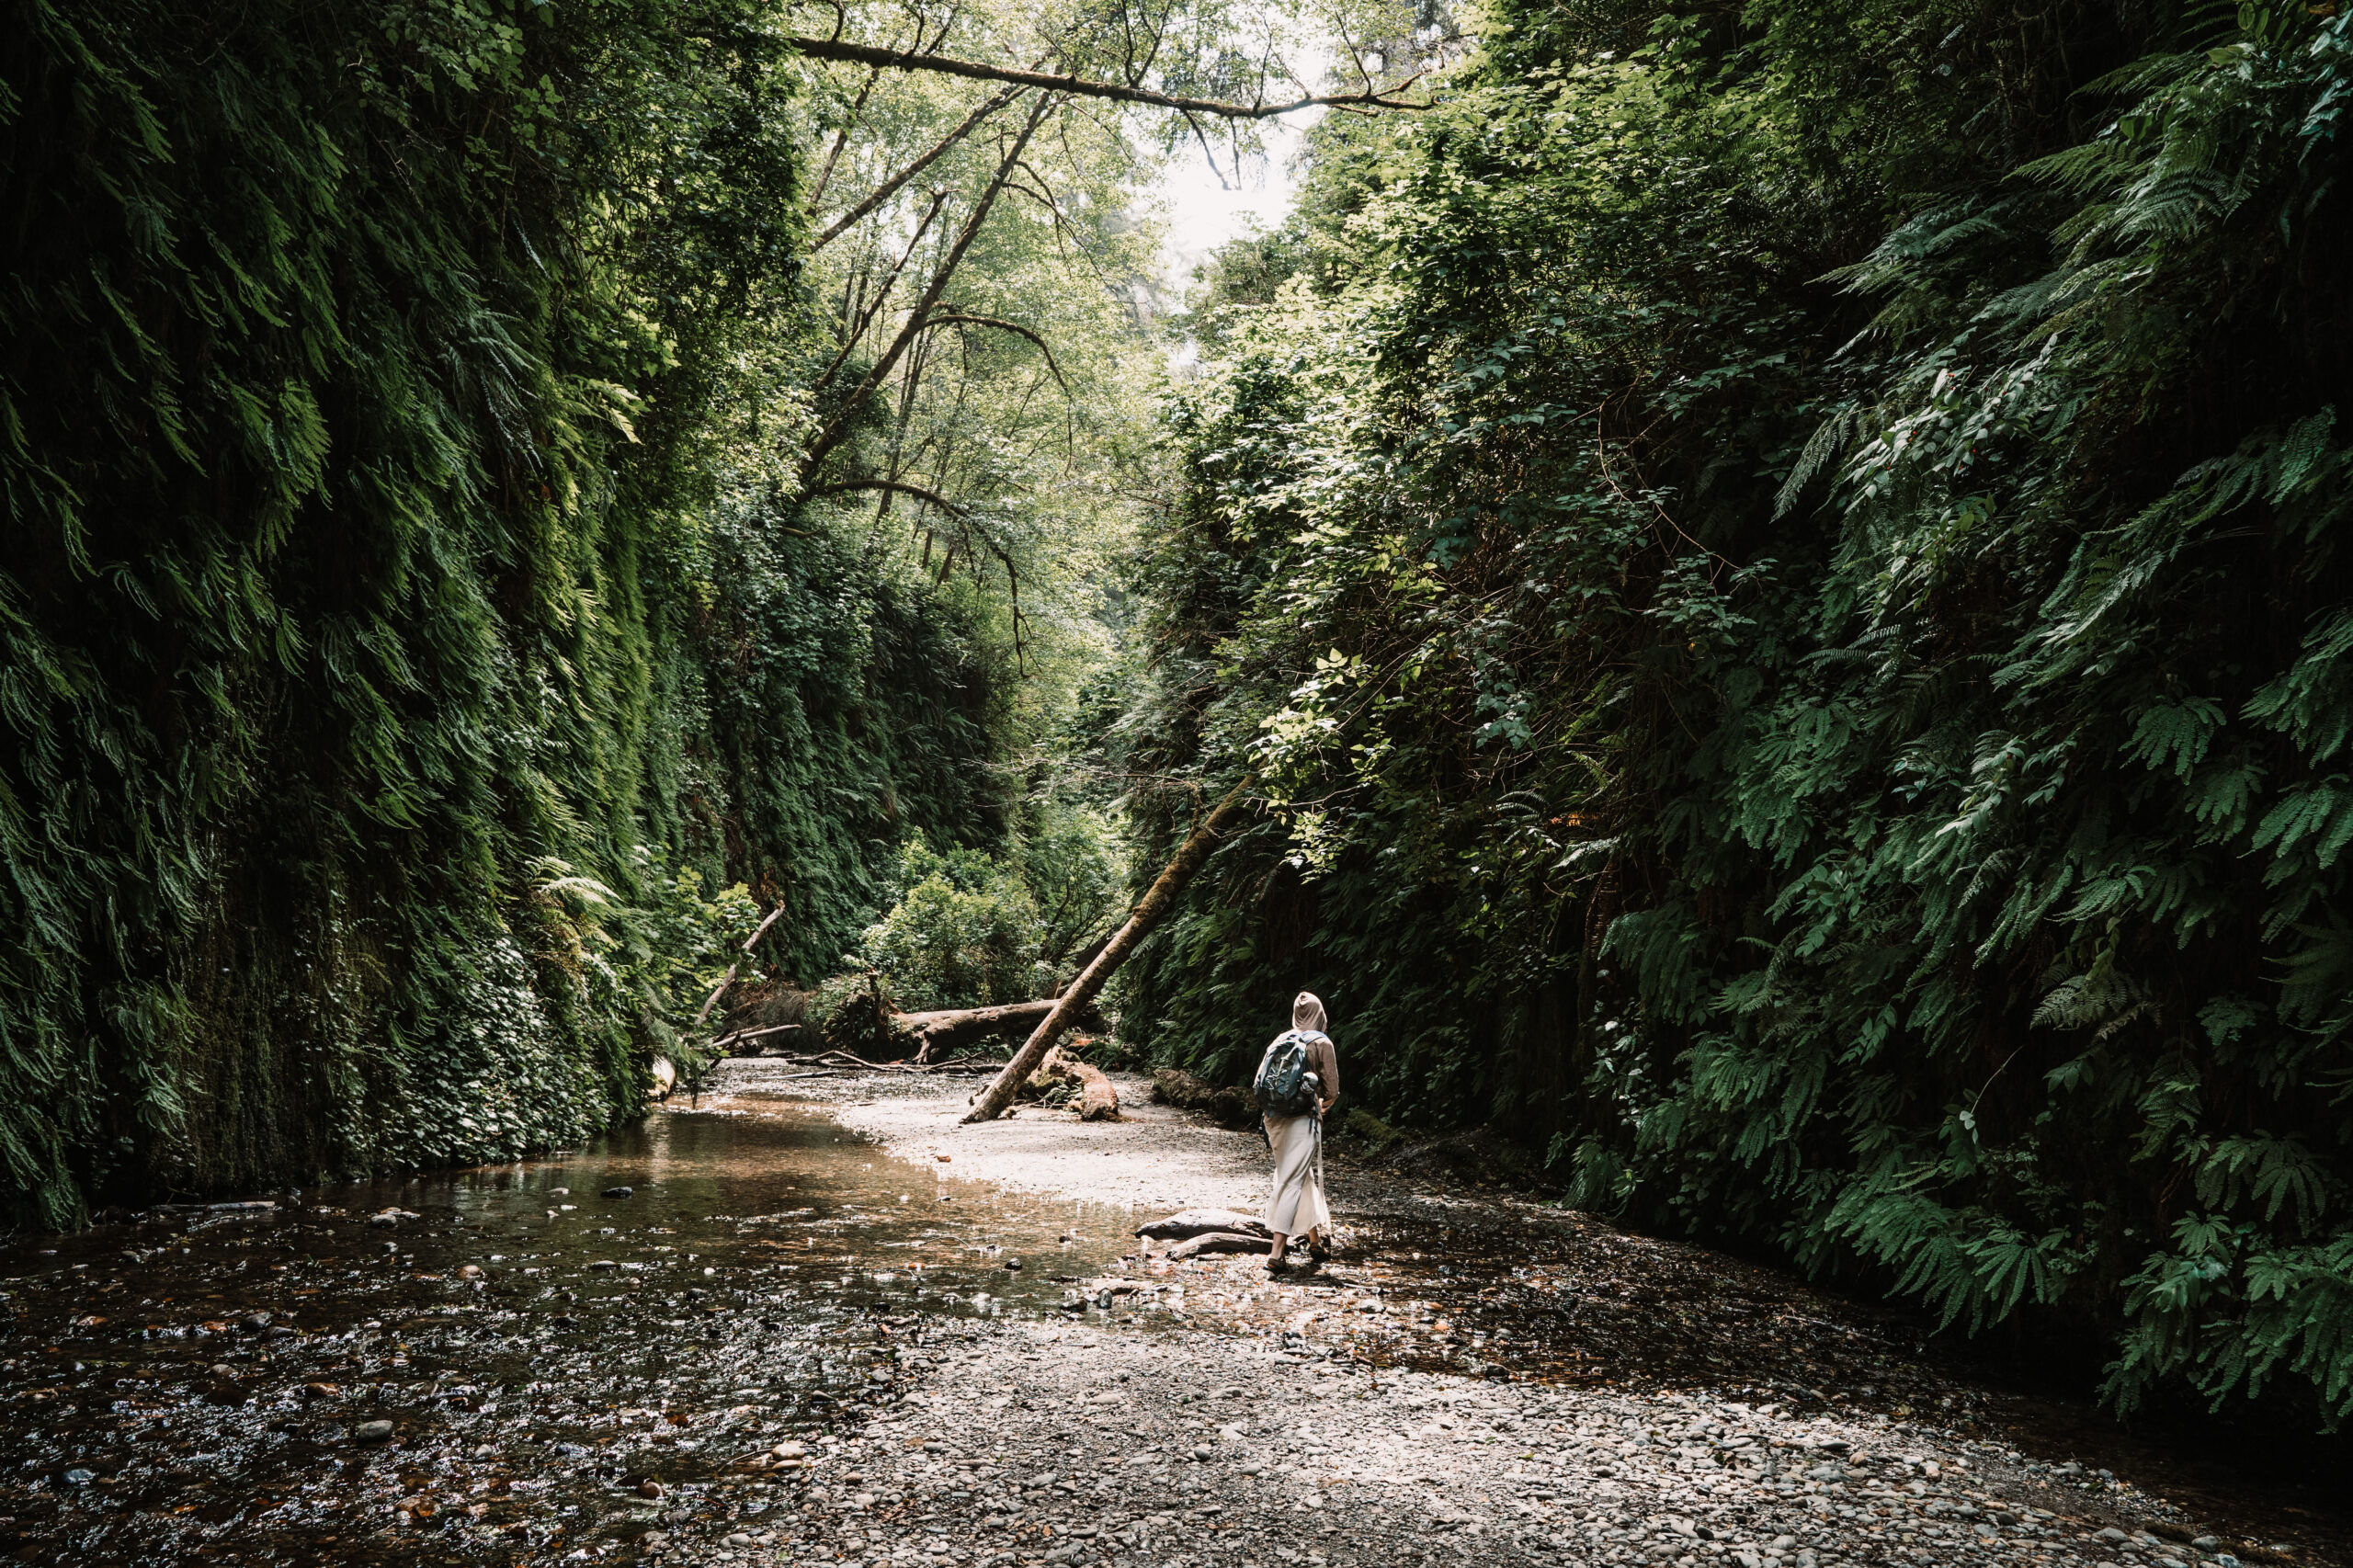 A girl walking through the stream in the middle of Fern Canyon